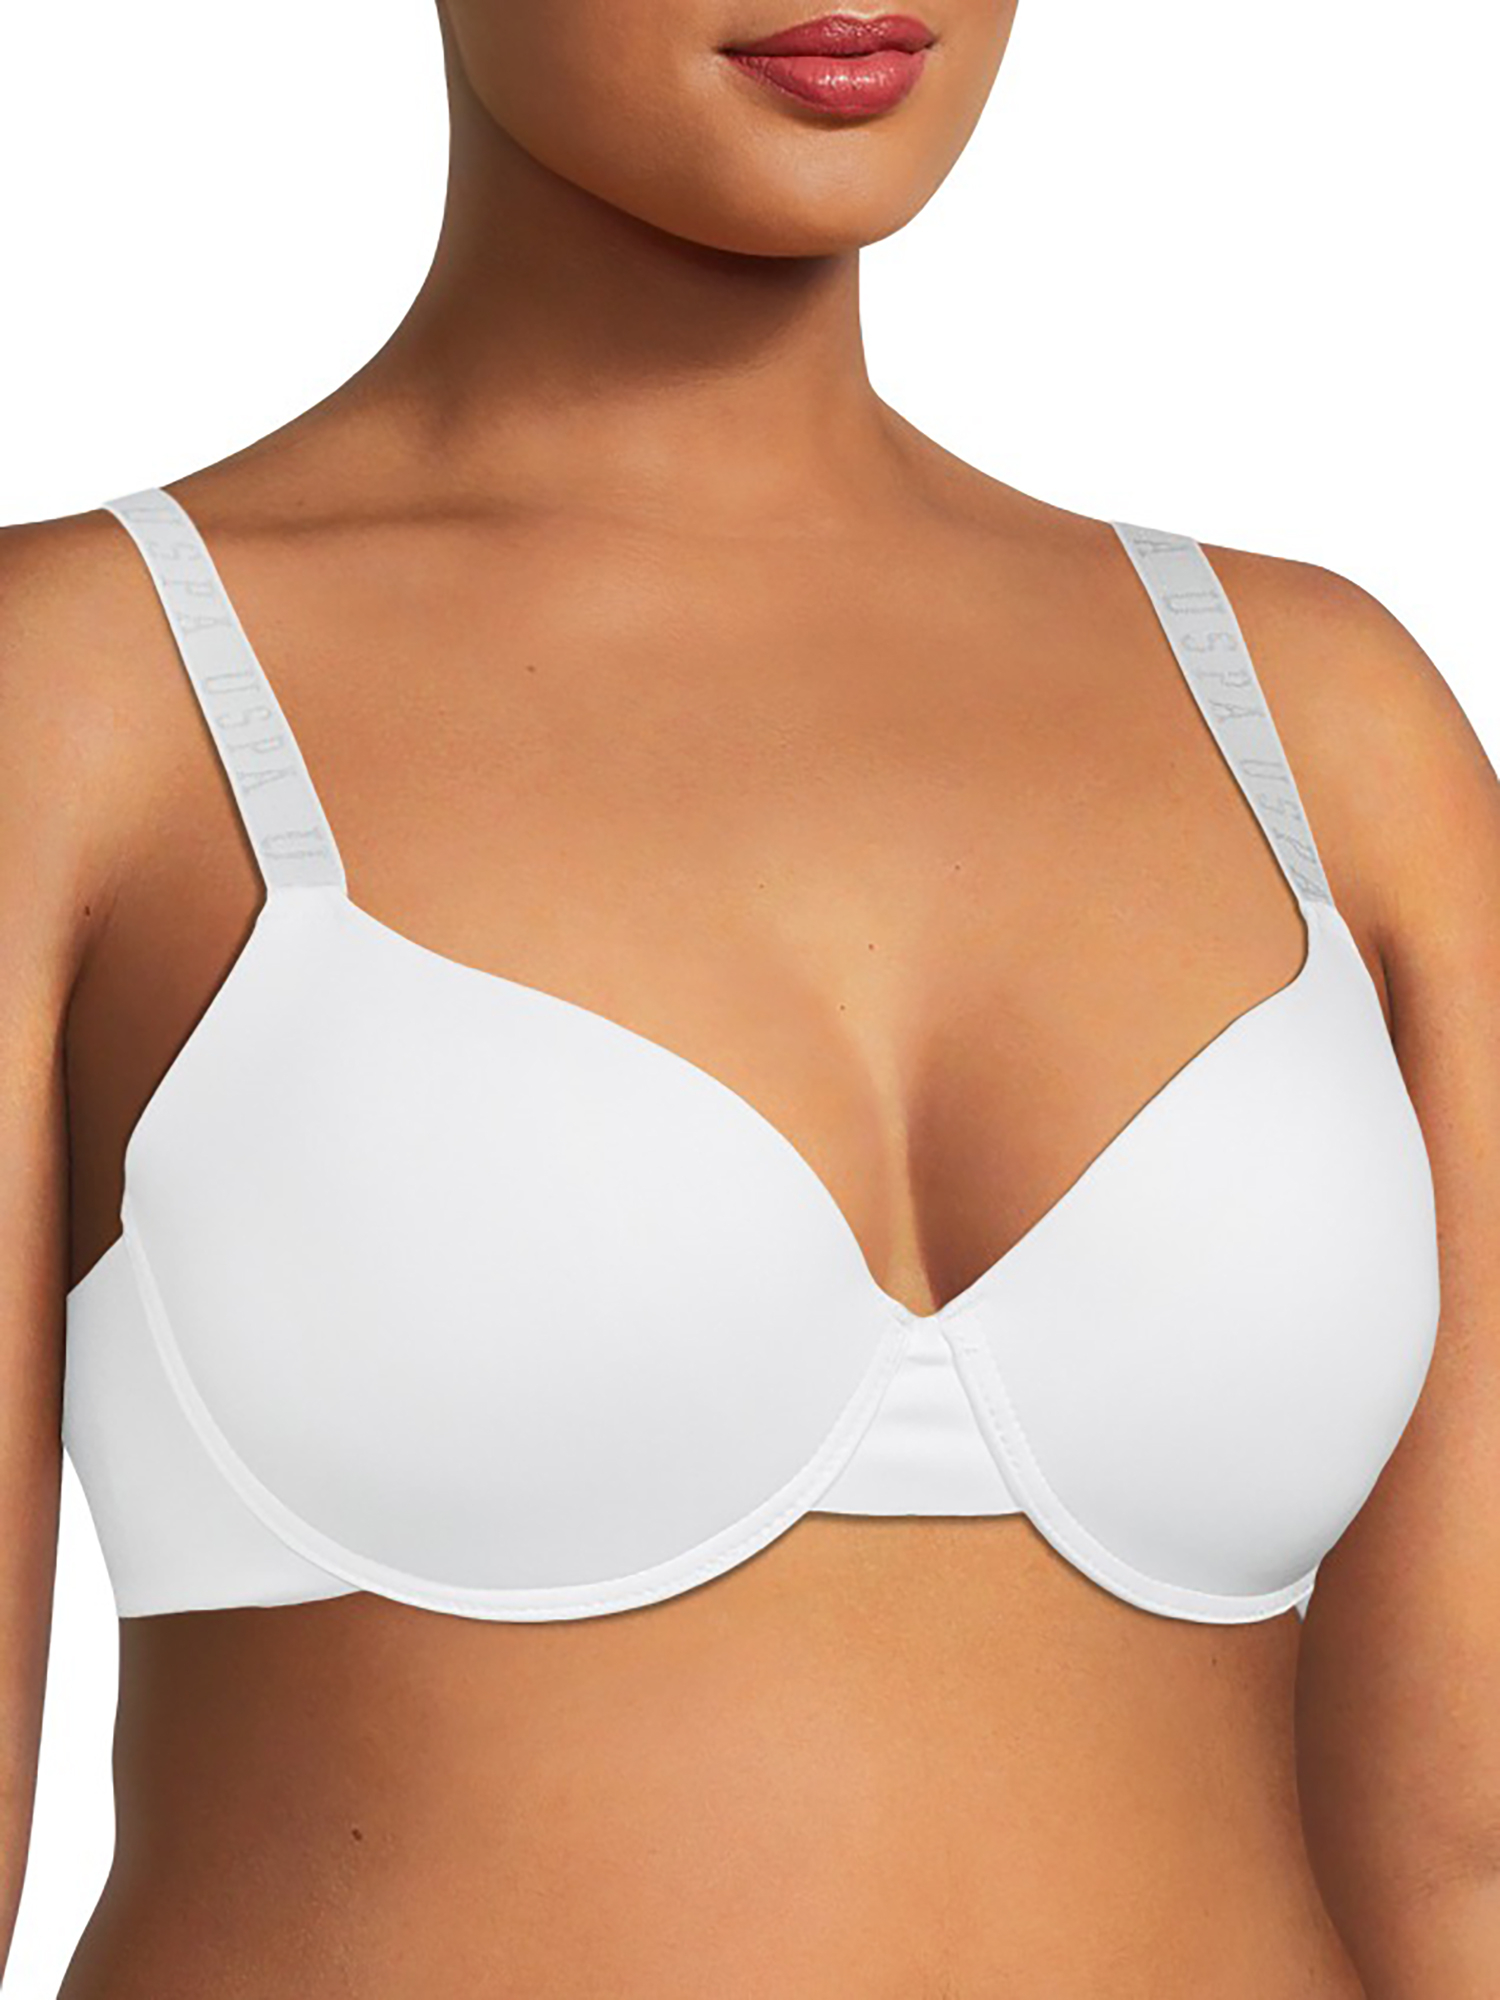 U.S. Polo Assn. Women's Plus Size Tag-Free Microfiber Bra with Gentle Lift, 2-Pack - image 4 of 4